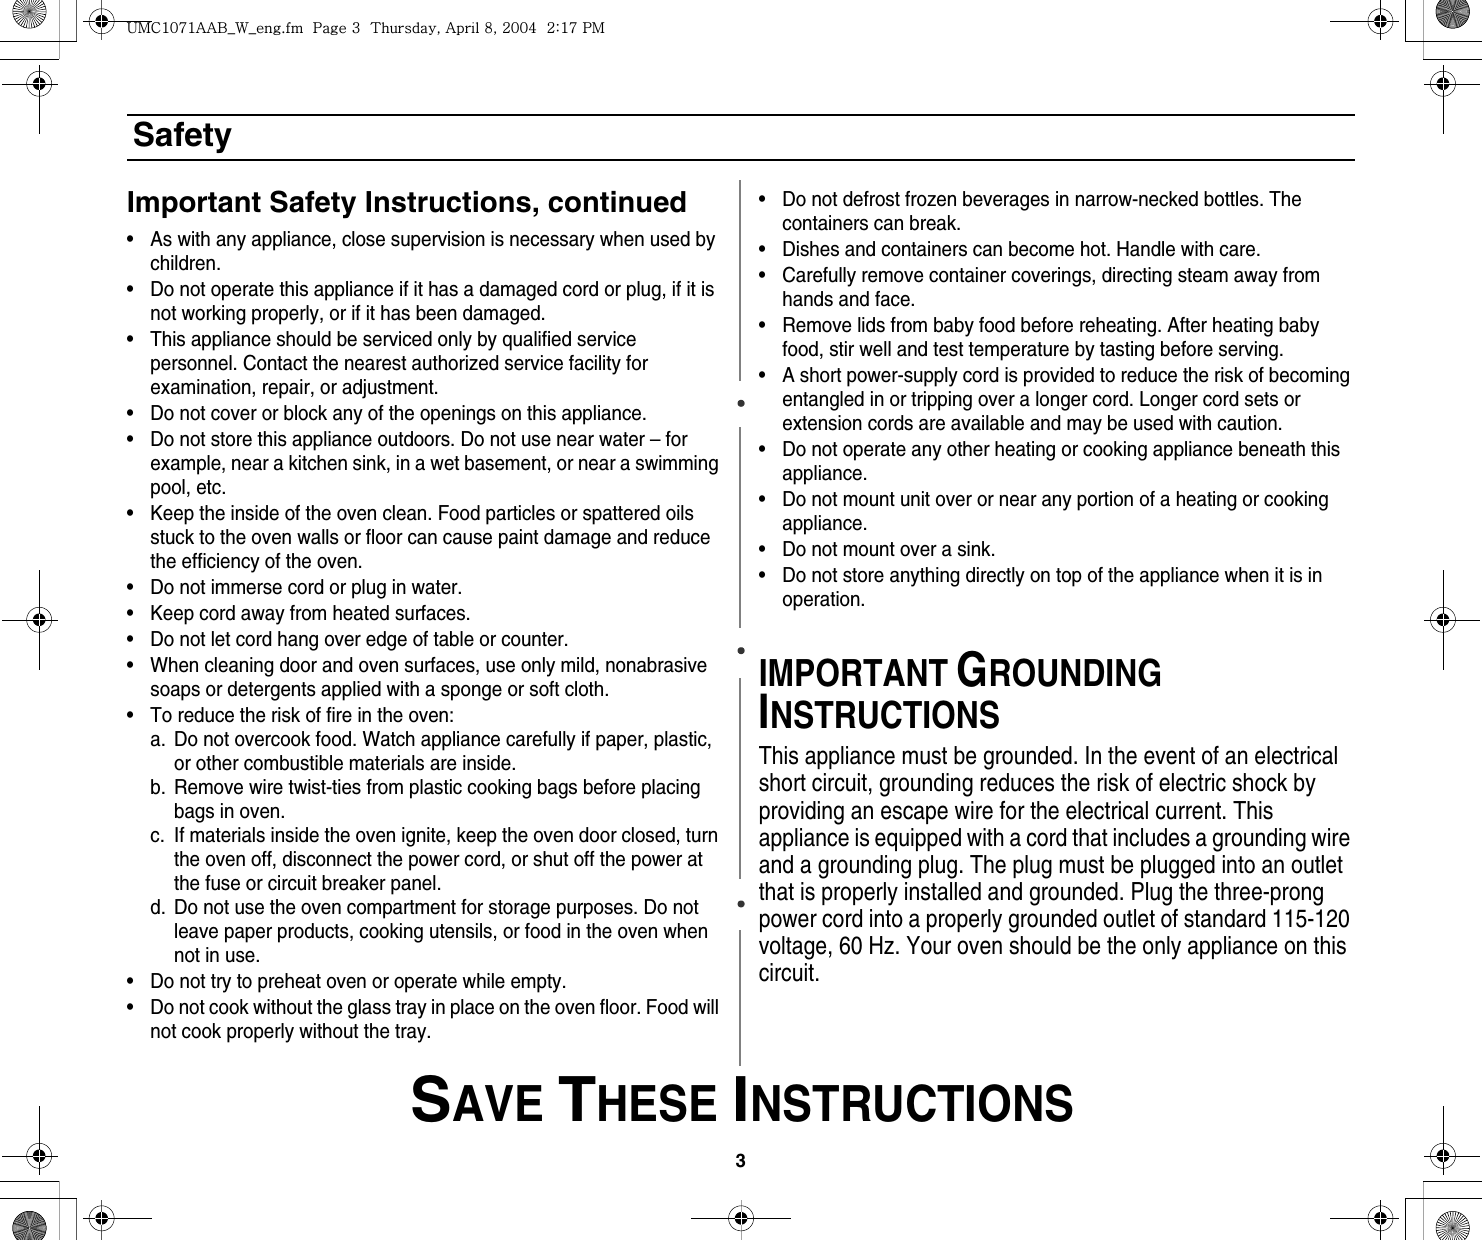 3 SAVE THESE INSTRUCTIONSSafetyImportant Safety Instructions, continued• As with any appliance, close supervision is necessary when used by children.• Do not operate this appliance if it has a damaged cord or plug, if it is not working properly, or if it has been damaged.• This appliance should be serviced only by qualified service personnel. Contact the nearest authorized service facility for examination, repair, or adjustment.• Do not cover or block any of the openings on this appliance.• Do not store this appliance outdoors. Do not use near water – for example, near a kitchen sink, in a wet basement, or near a swimming pool, etc. • Keep the inside of the oven clean. Food particles or spattered oils stuck to the oven walls or floor can cause paint damage and reduce the efficiency of the oven.• Do not immerse cord or plug in water.• Keep cord away from heated surfaces.• Do not let cord hang over edge of table or counter.• When cleaning door and oven surfaces, use only mild, nonabrasive soaps or detergents applied with a sponge or soft cloth.• To reduce the risk of fire in the oven:a. Do not overcook food. Watch appliance carefully if paper, plastic, or other combustible materials are inside.b. Remove wire twist-ties from plastic cooking bags before placing bags in oven.c. If materials inside the oven ignite, keep the oven door closed, turn the oven off, disconnect the power cord, or shut off the power at the fuse or circuit breaker panel.d. Do not use the oven compartment for storage purposes. Do not leave paper products, cooking utensils, or food in the oven when not in use.• Do not try to preheat oven or operate while empty.• Do not cook without the glass tray in place on the oven floor. Food will not cook properly without the tray.• Do not defrost frozen beverages in narrow-necked bottles. The containers can break.• Dishes and containers can become hot. Handle with care.• Carefully remove container coverings, directing steam away from hands and face.• Remove lids from baby food before reheating. After heating baby food, stir well and test temperature by tasting before serving.• A short power-supply cord is provided to reduce the risk of becoming entangled in or tripping over a longer cord. Longer cord sets or extension cords are available and may be used with caution. • Do not operate any other heating or cooking appliance beneath this appliance.• Do not mount unit over or near any portion of a heating or cooking appliance.• Do not mount over a sink.• Do not store anything directly on top of the appliance when it is in operation.IMPORTANT GROUNDING INSTRUCTIONSThis appliance must be grounded. In the event of an electrical short circuit, grounding reduces the risk of electric shock by providing an escape wire for the electrical current. This appliance is equipped with a cord that includes a grounding wire and a grounding plug. The plug must be plugged into an outlet that is properly installed and grounded. Plug the three-prong power cord into a properly grounded outlet of standard 115-120 voltage, 60 Hz. Your oven should be the only appliance on this circuit.|tjXW^Xhhi~UGGwGZGG{SGhG_SGYWW[GGYaX^Gwt